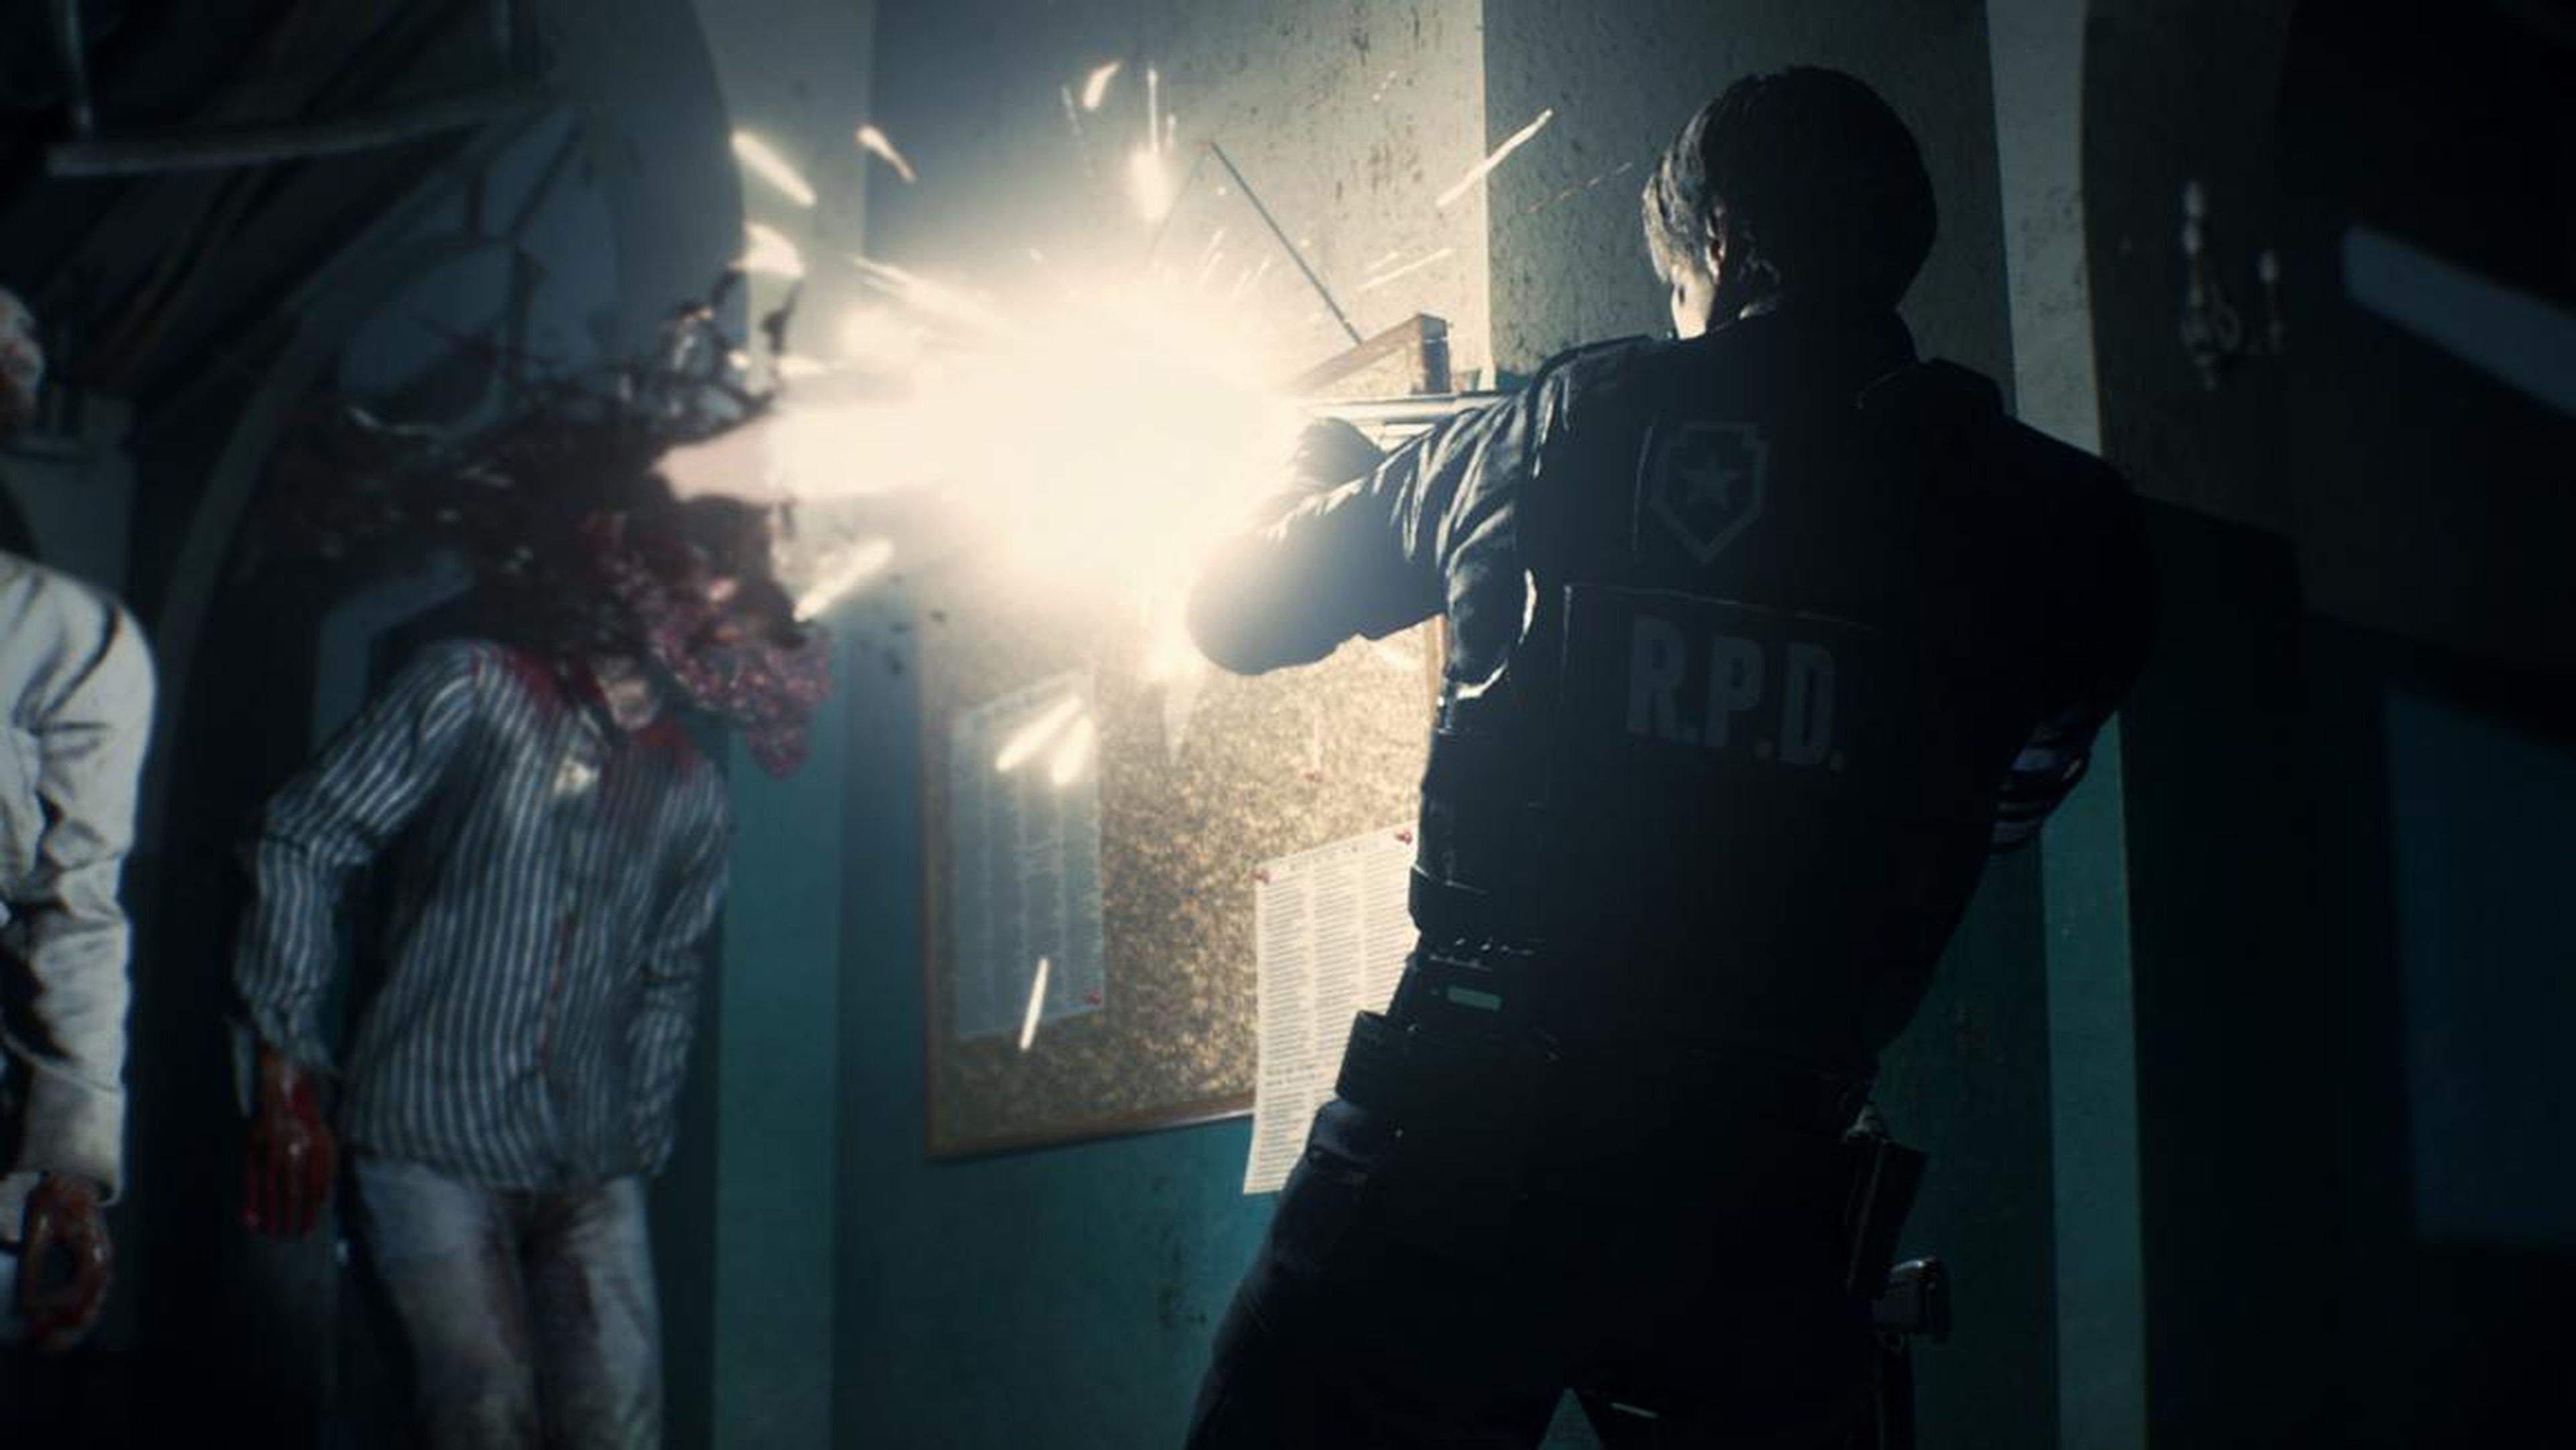 Updated controls and mechanics completely change the way "Resident Evil 2" is played.